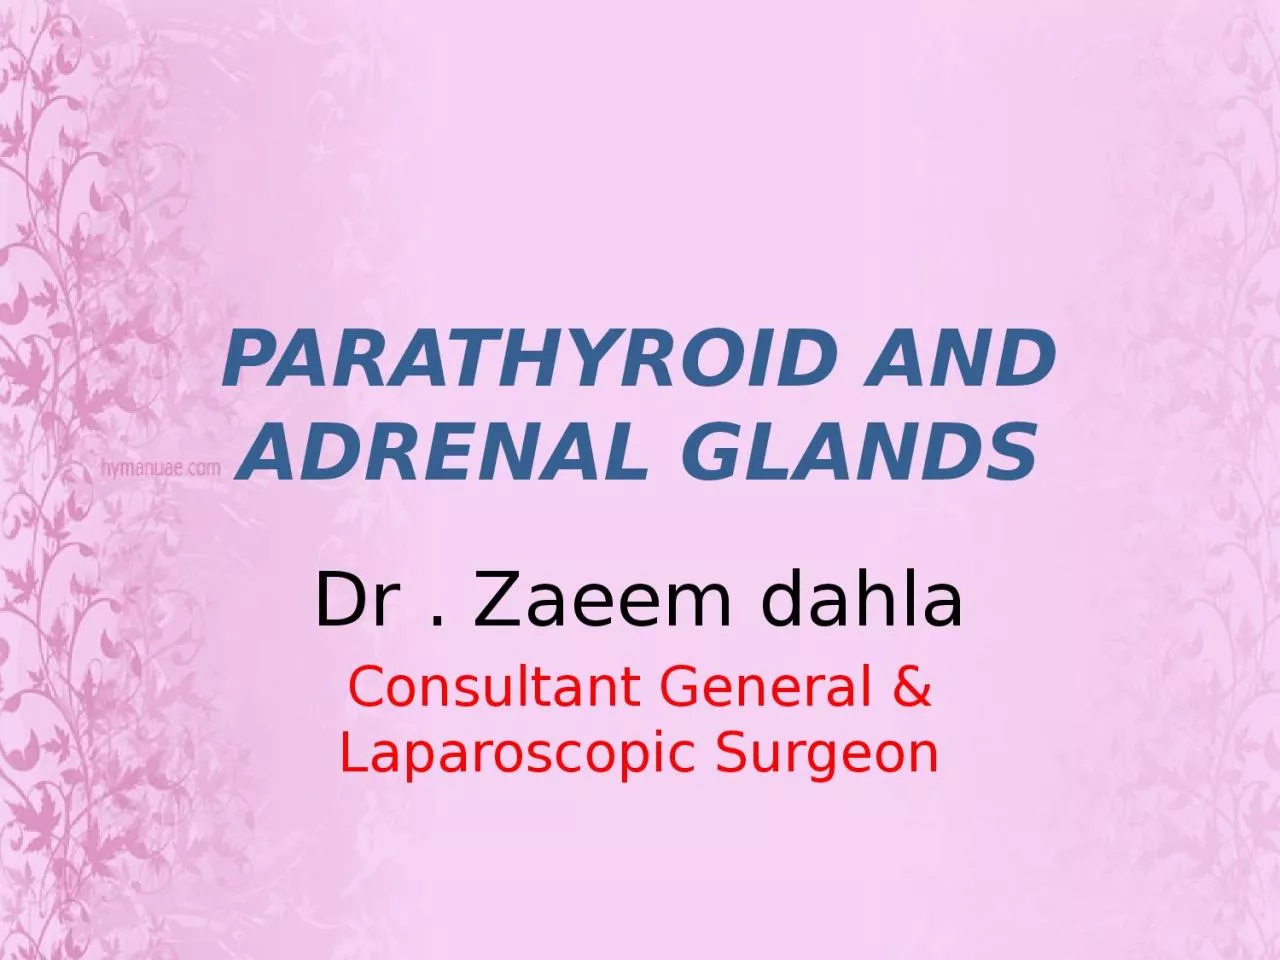 PARATHYROID AND ADRENAL GLANDS